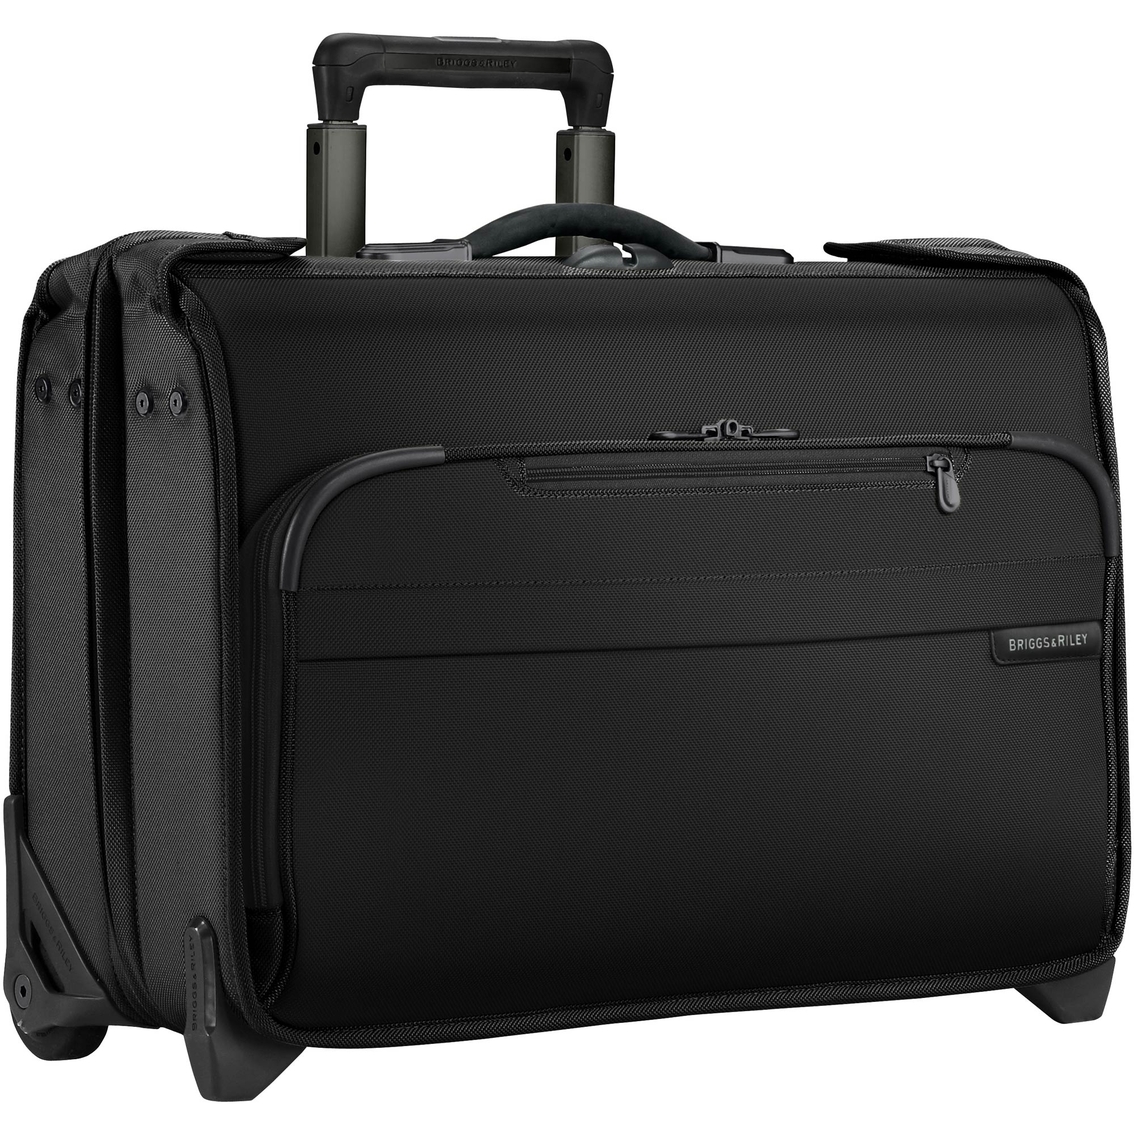 Briggs & Riley Baseline Carry-on Wheeled Garment Bag | Luggage | Home & Appliances | Shop The ...